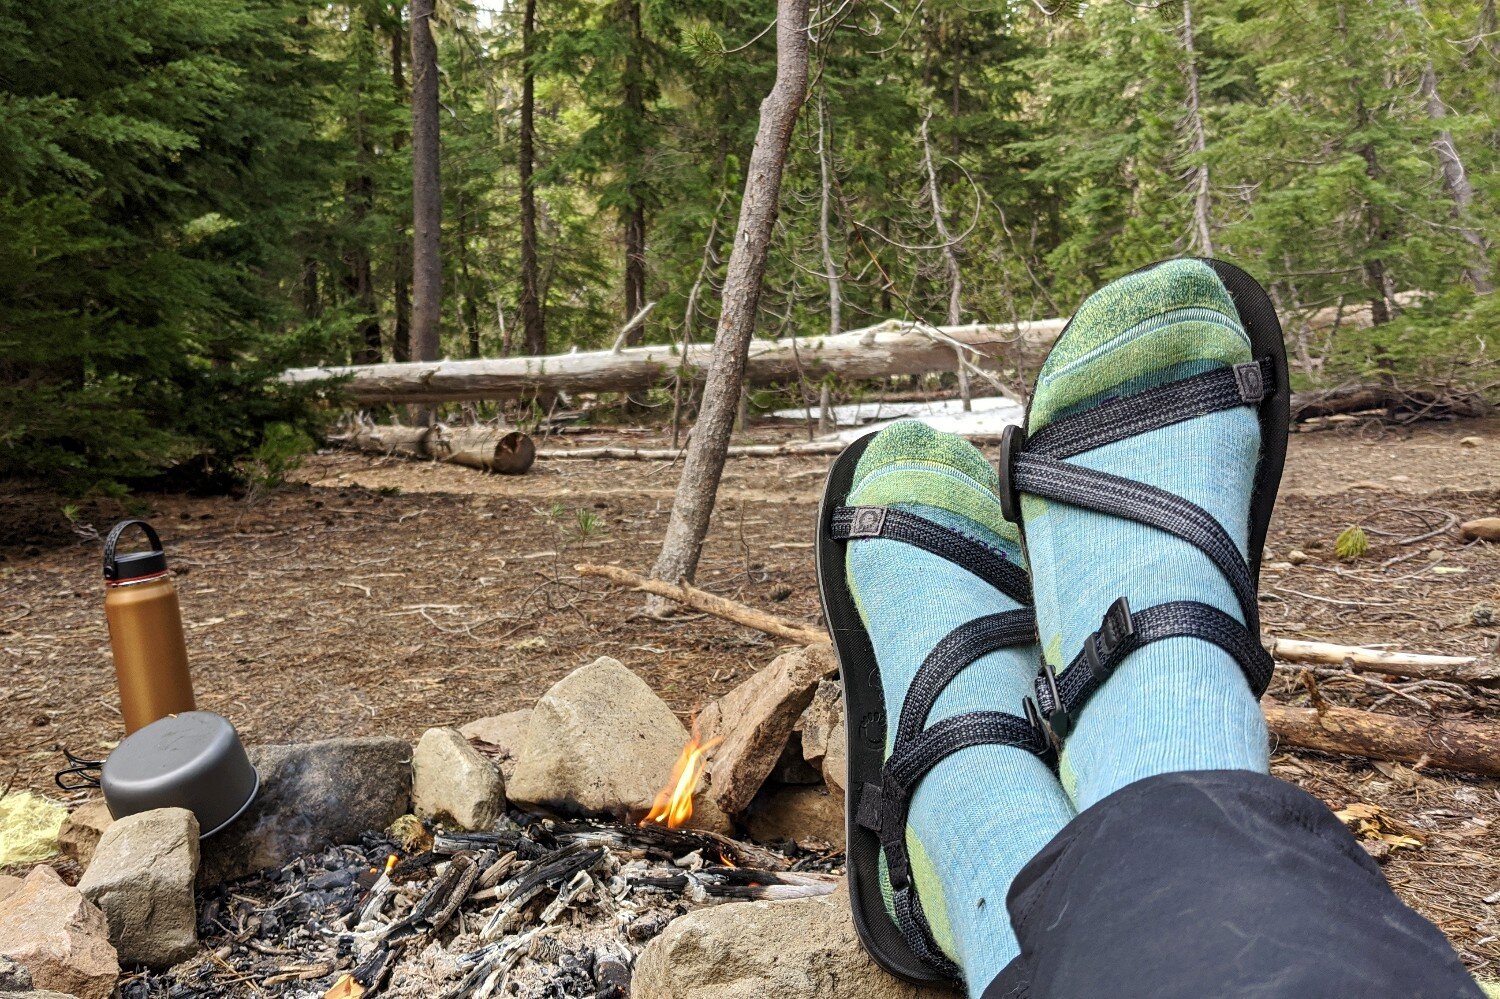 Enjoying a lazy morning fire with the classic combo of Darn Tough Hiker Micro Crew Socks and Xero Shoes Z Trail Sandals.